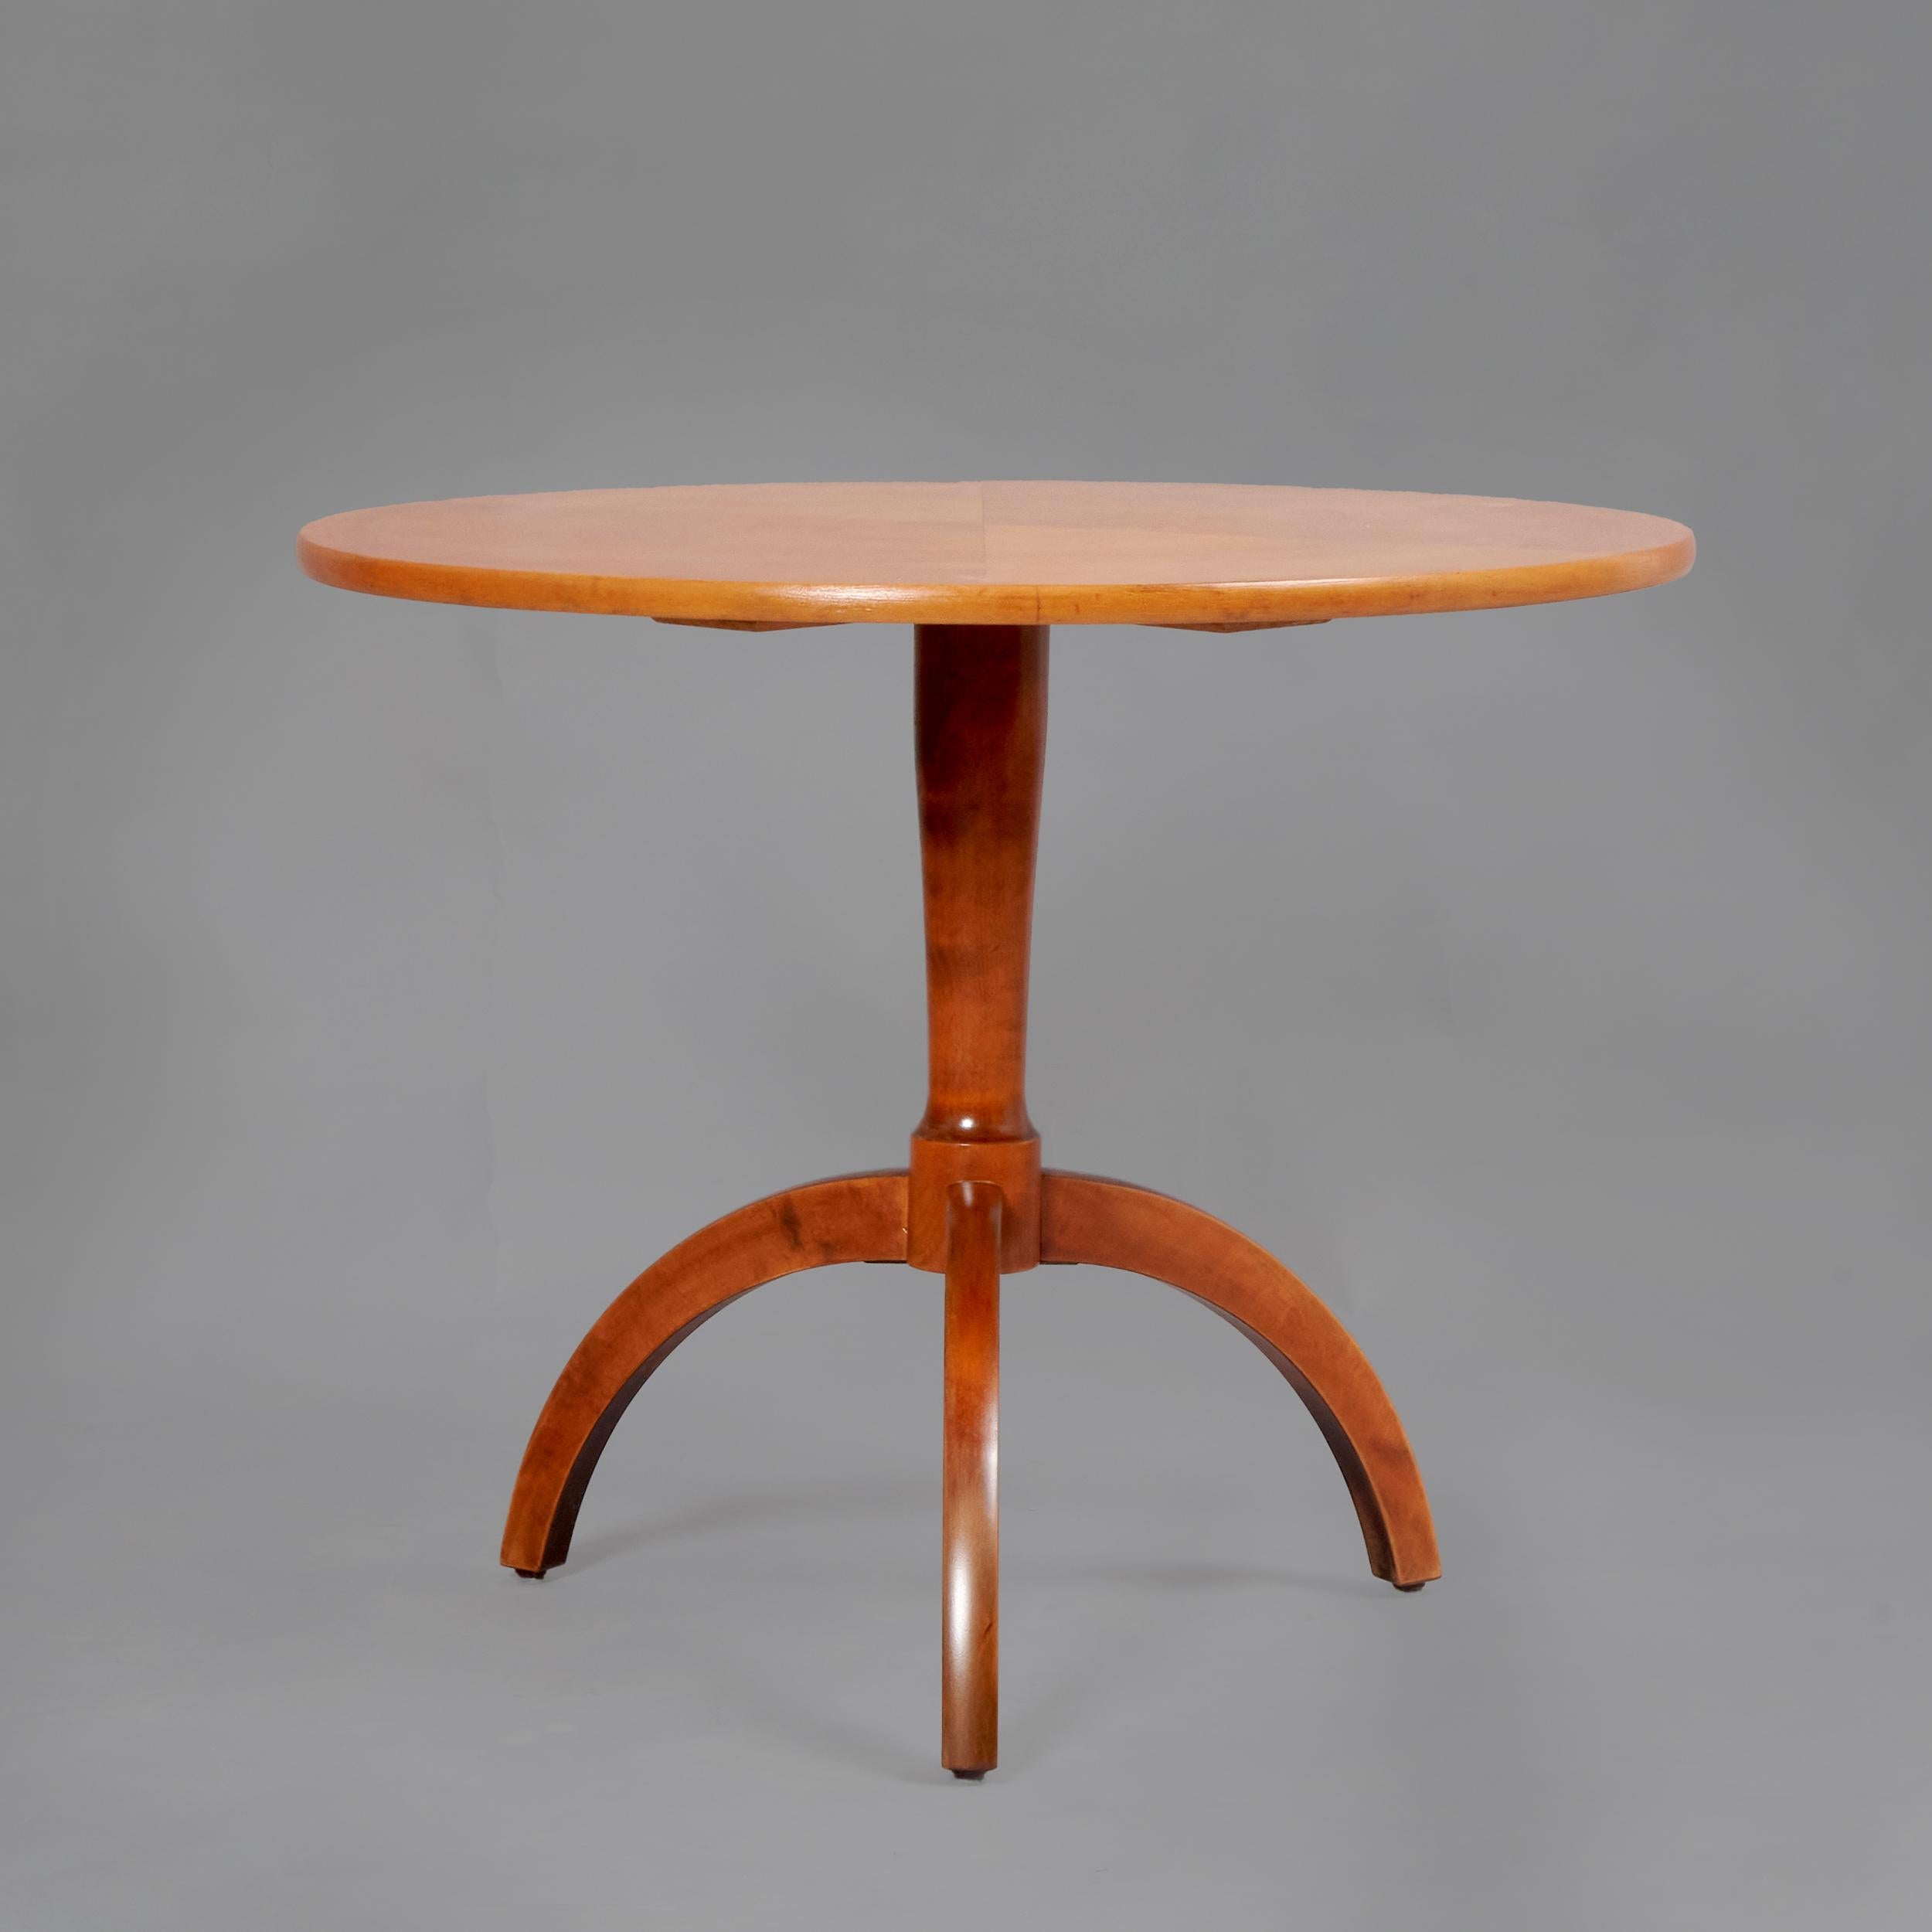 Side table of unknown designer in birch wood. Sweden, 50s
The cover of this table features an original hexagonal composition that, combined with the stained techinique, enhances the Birch grain.
It is in an escellent restrored condition, but may